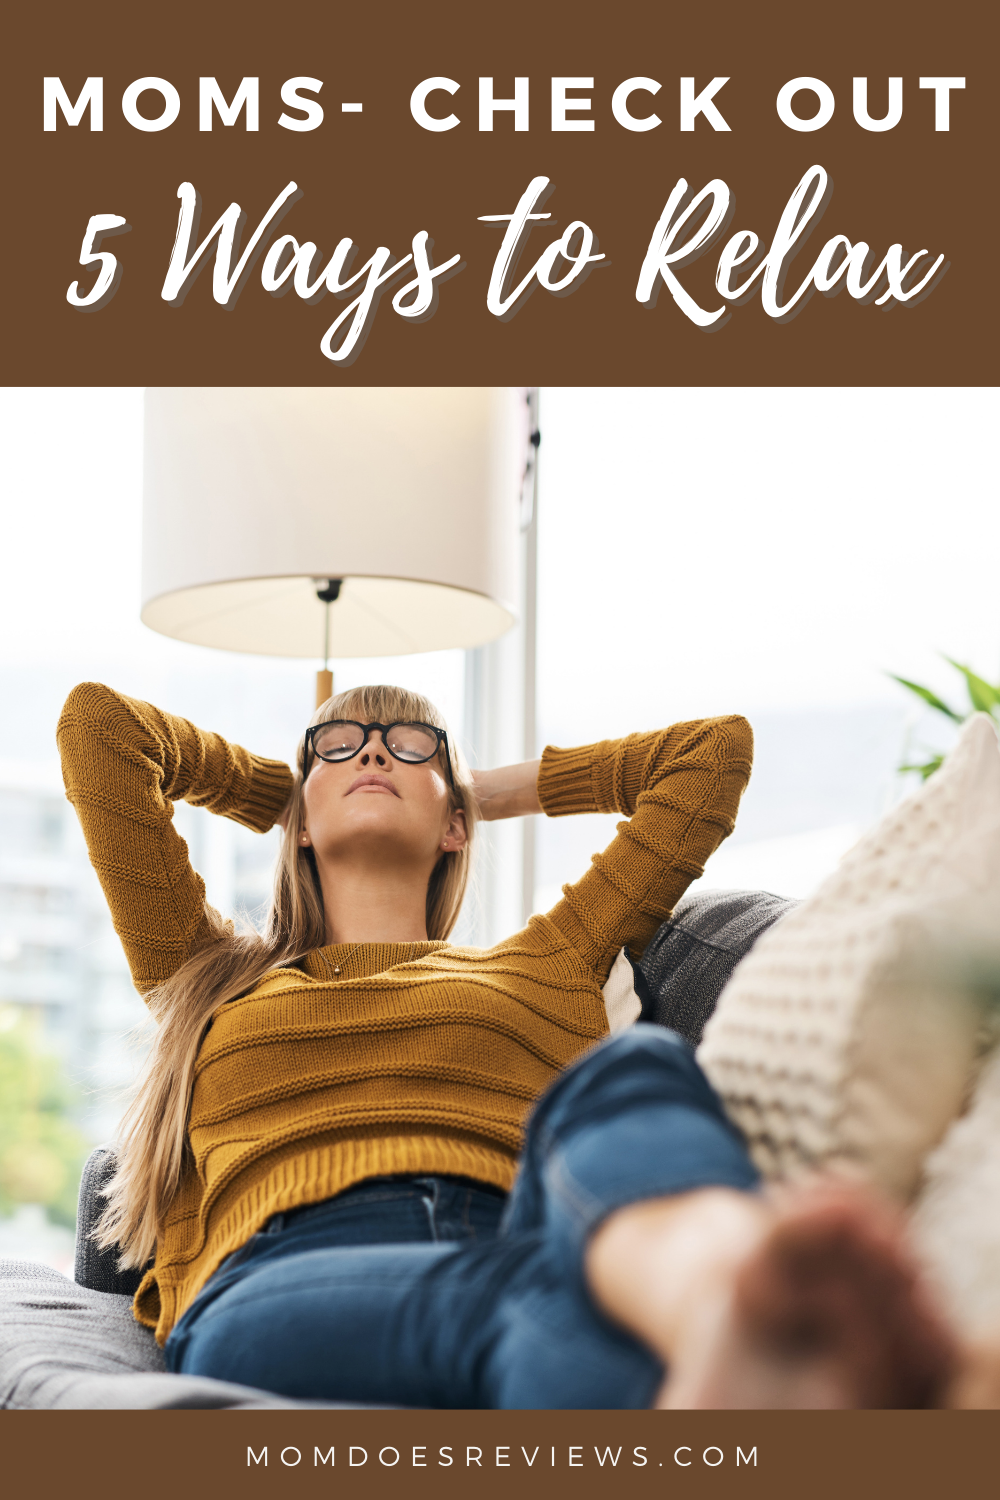 5 Ways to Relax and Treat Yourself As a Tired Mom